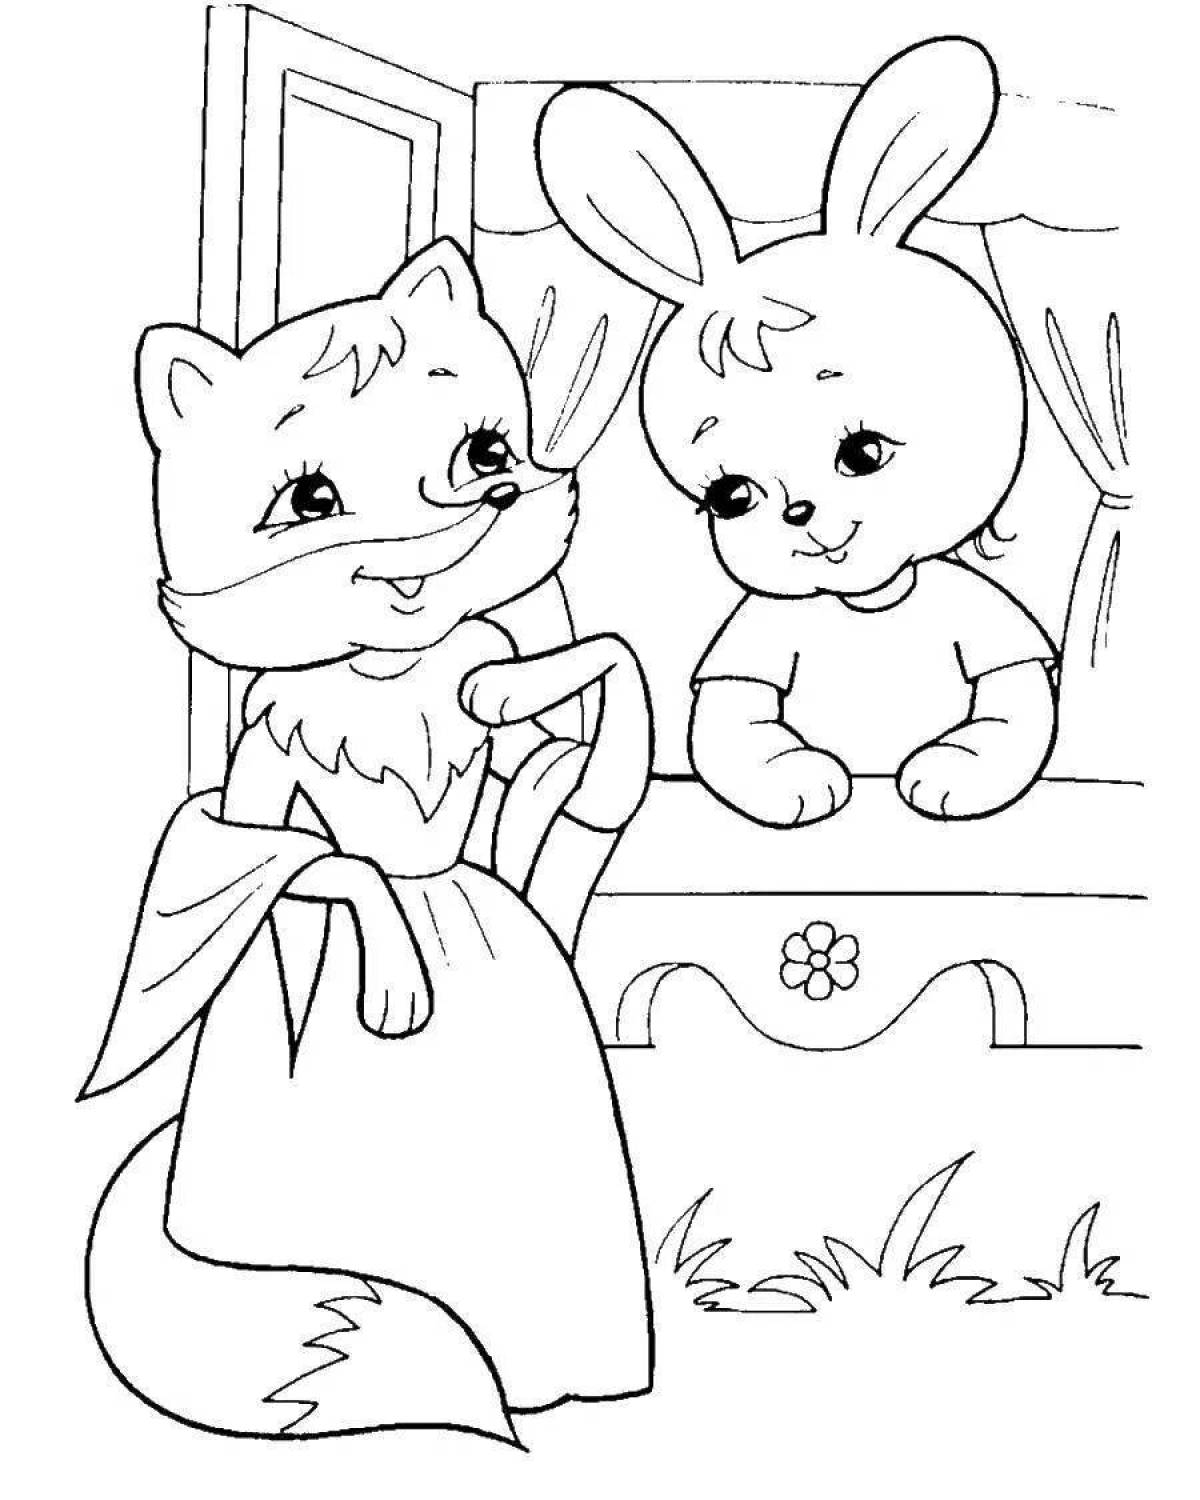 Cute fox and hare coloring book